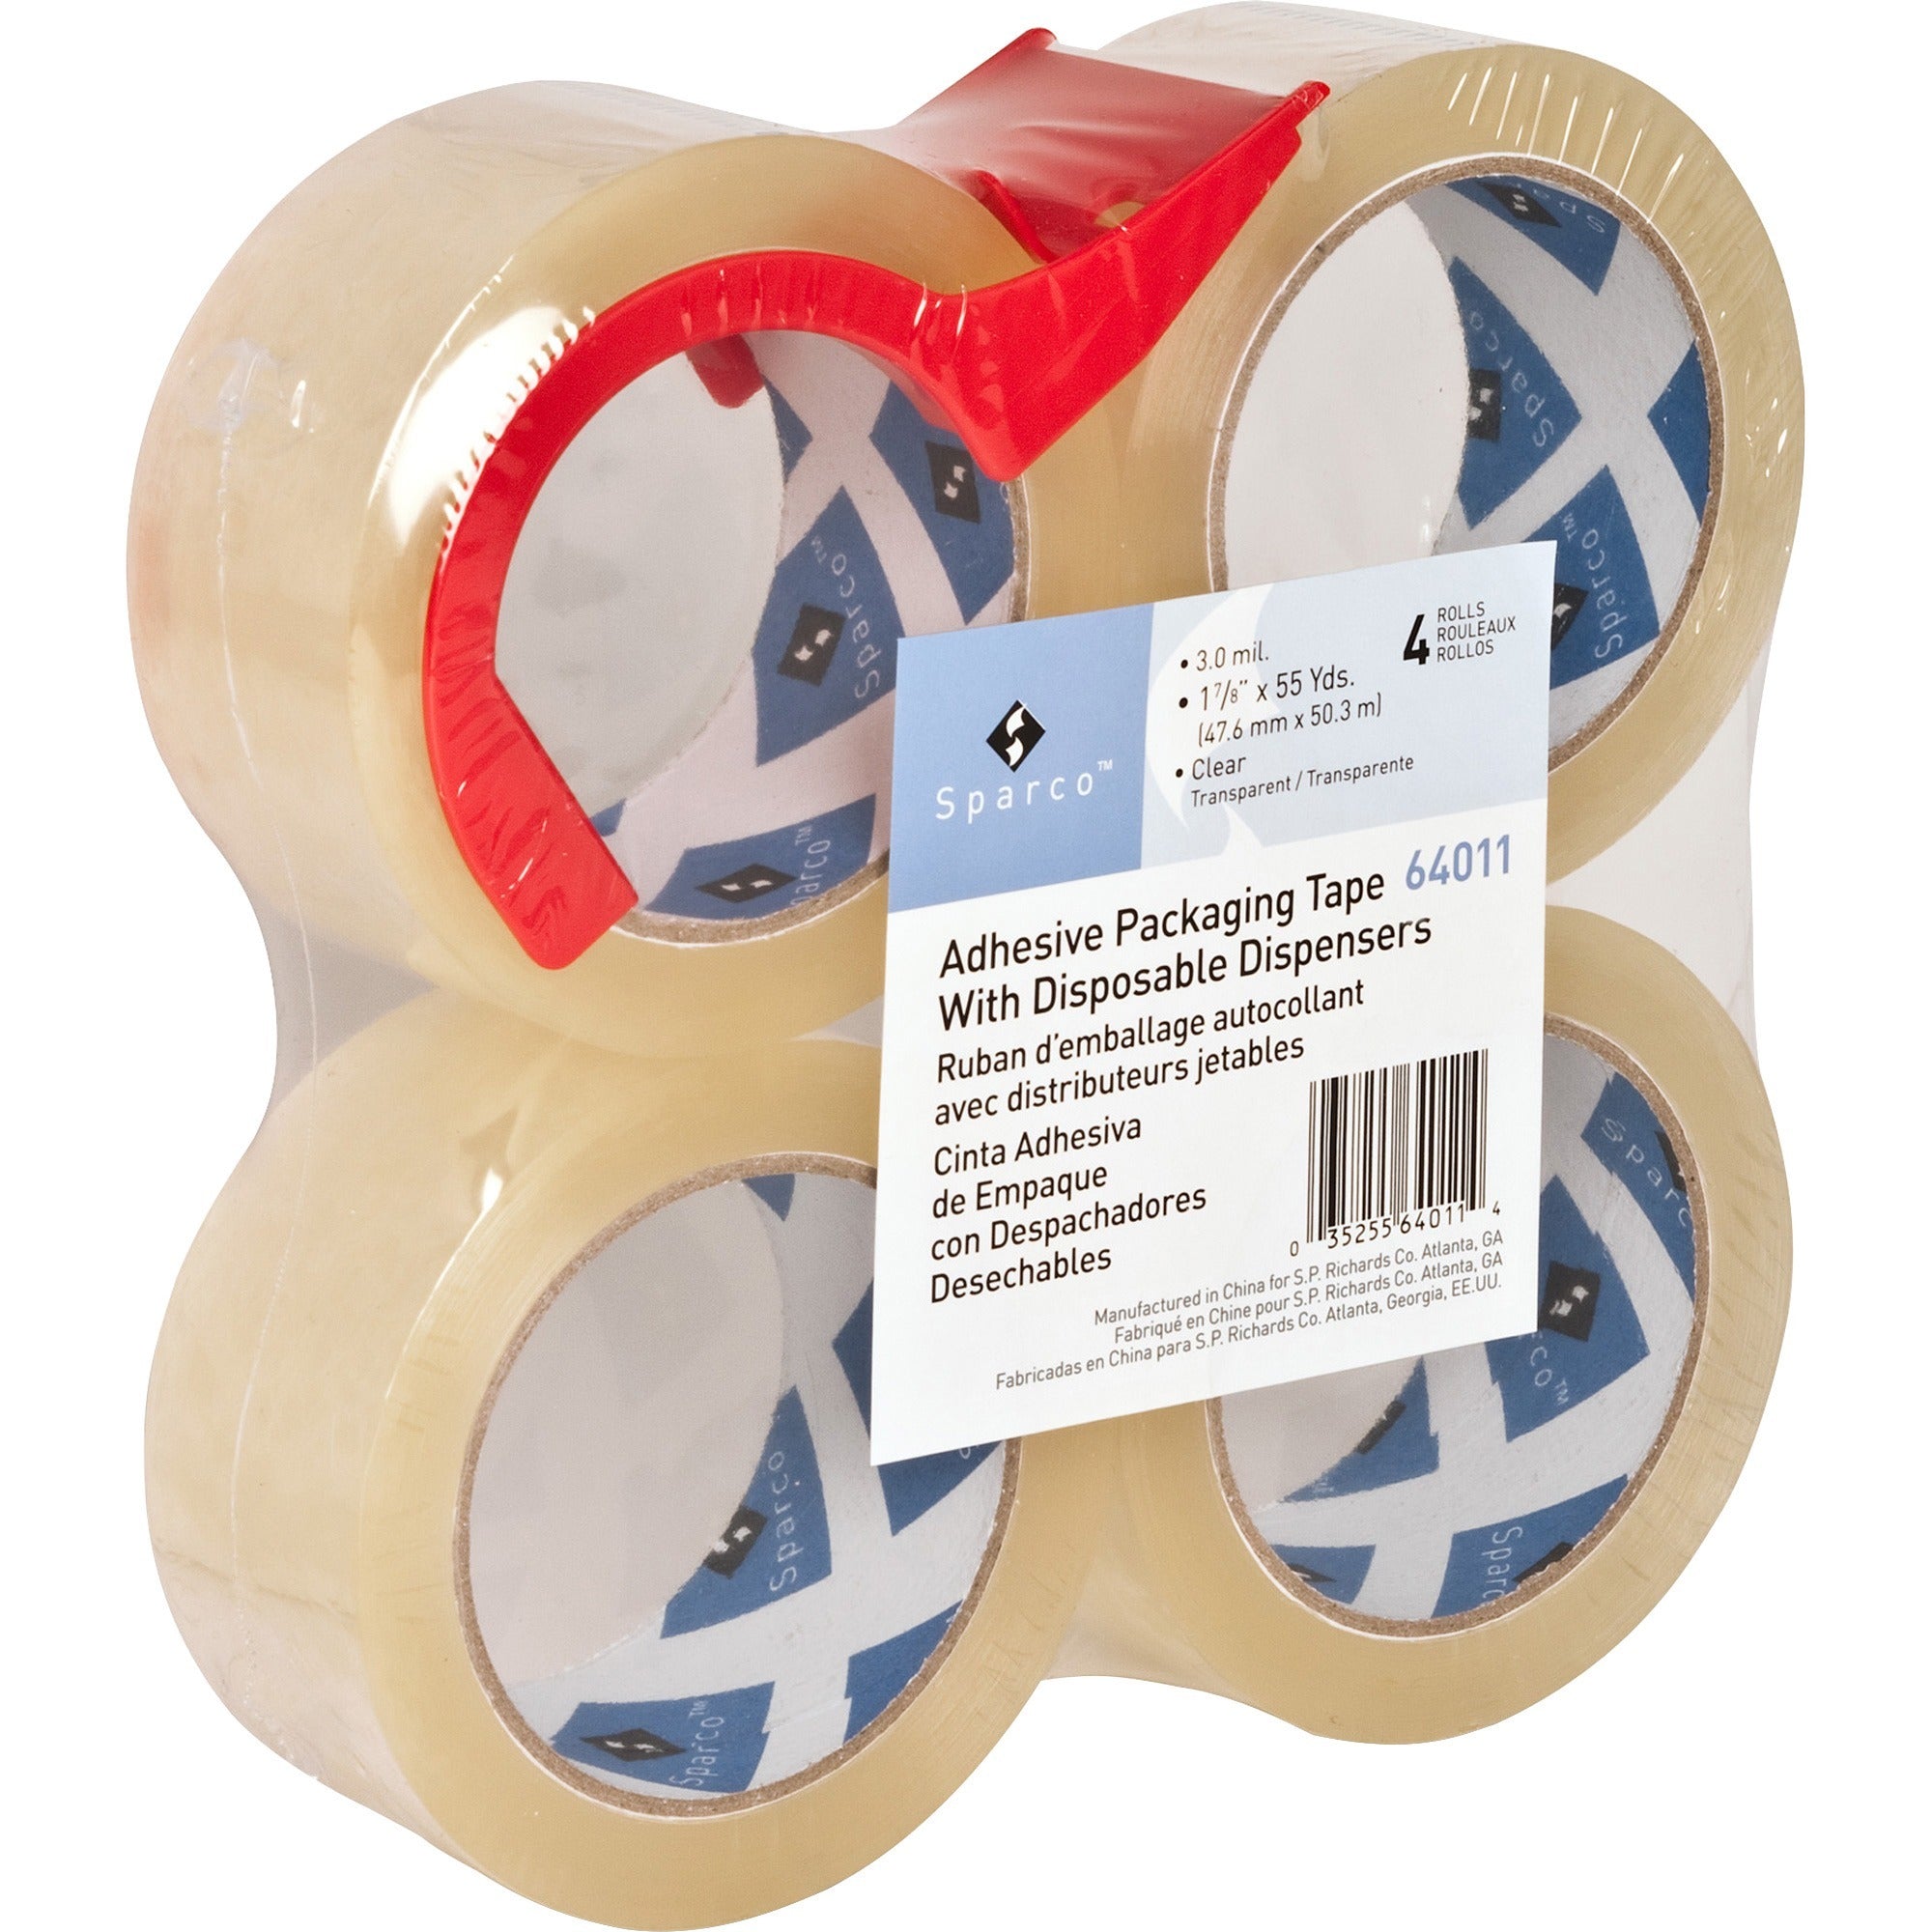 Sparco Heavy-duty Packaging Tape with Dispenser - 55 yd Length x 2" Width - 3" Core - 3 mil - Acrylic Backing - Dispenser Included - Tear Resistant, Split Resistant, Breakage Resistance - For Packing - 4 / Pack - Clear - 